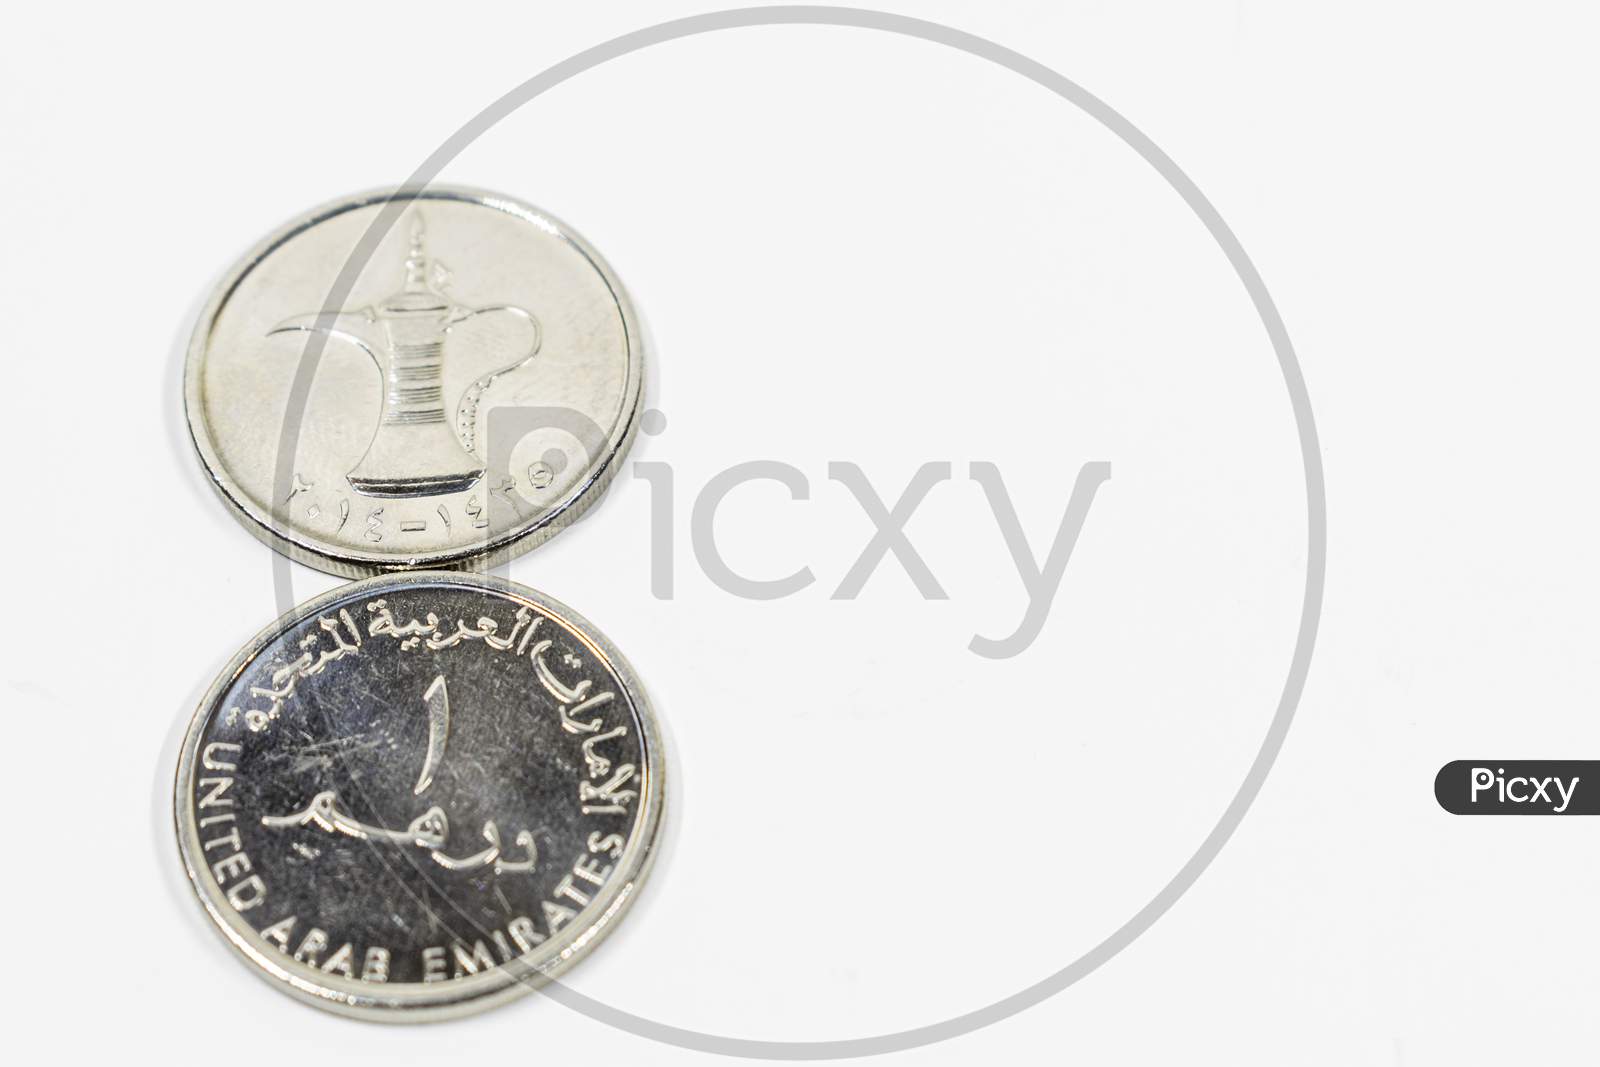 A Close Up View Of United Arab Emirates Coin With White Background, Fils, Uae Currency, Uae Coins, Fils